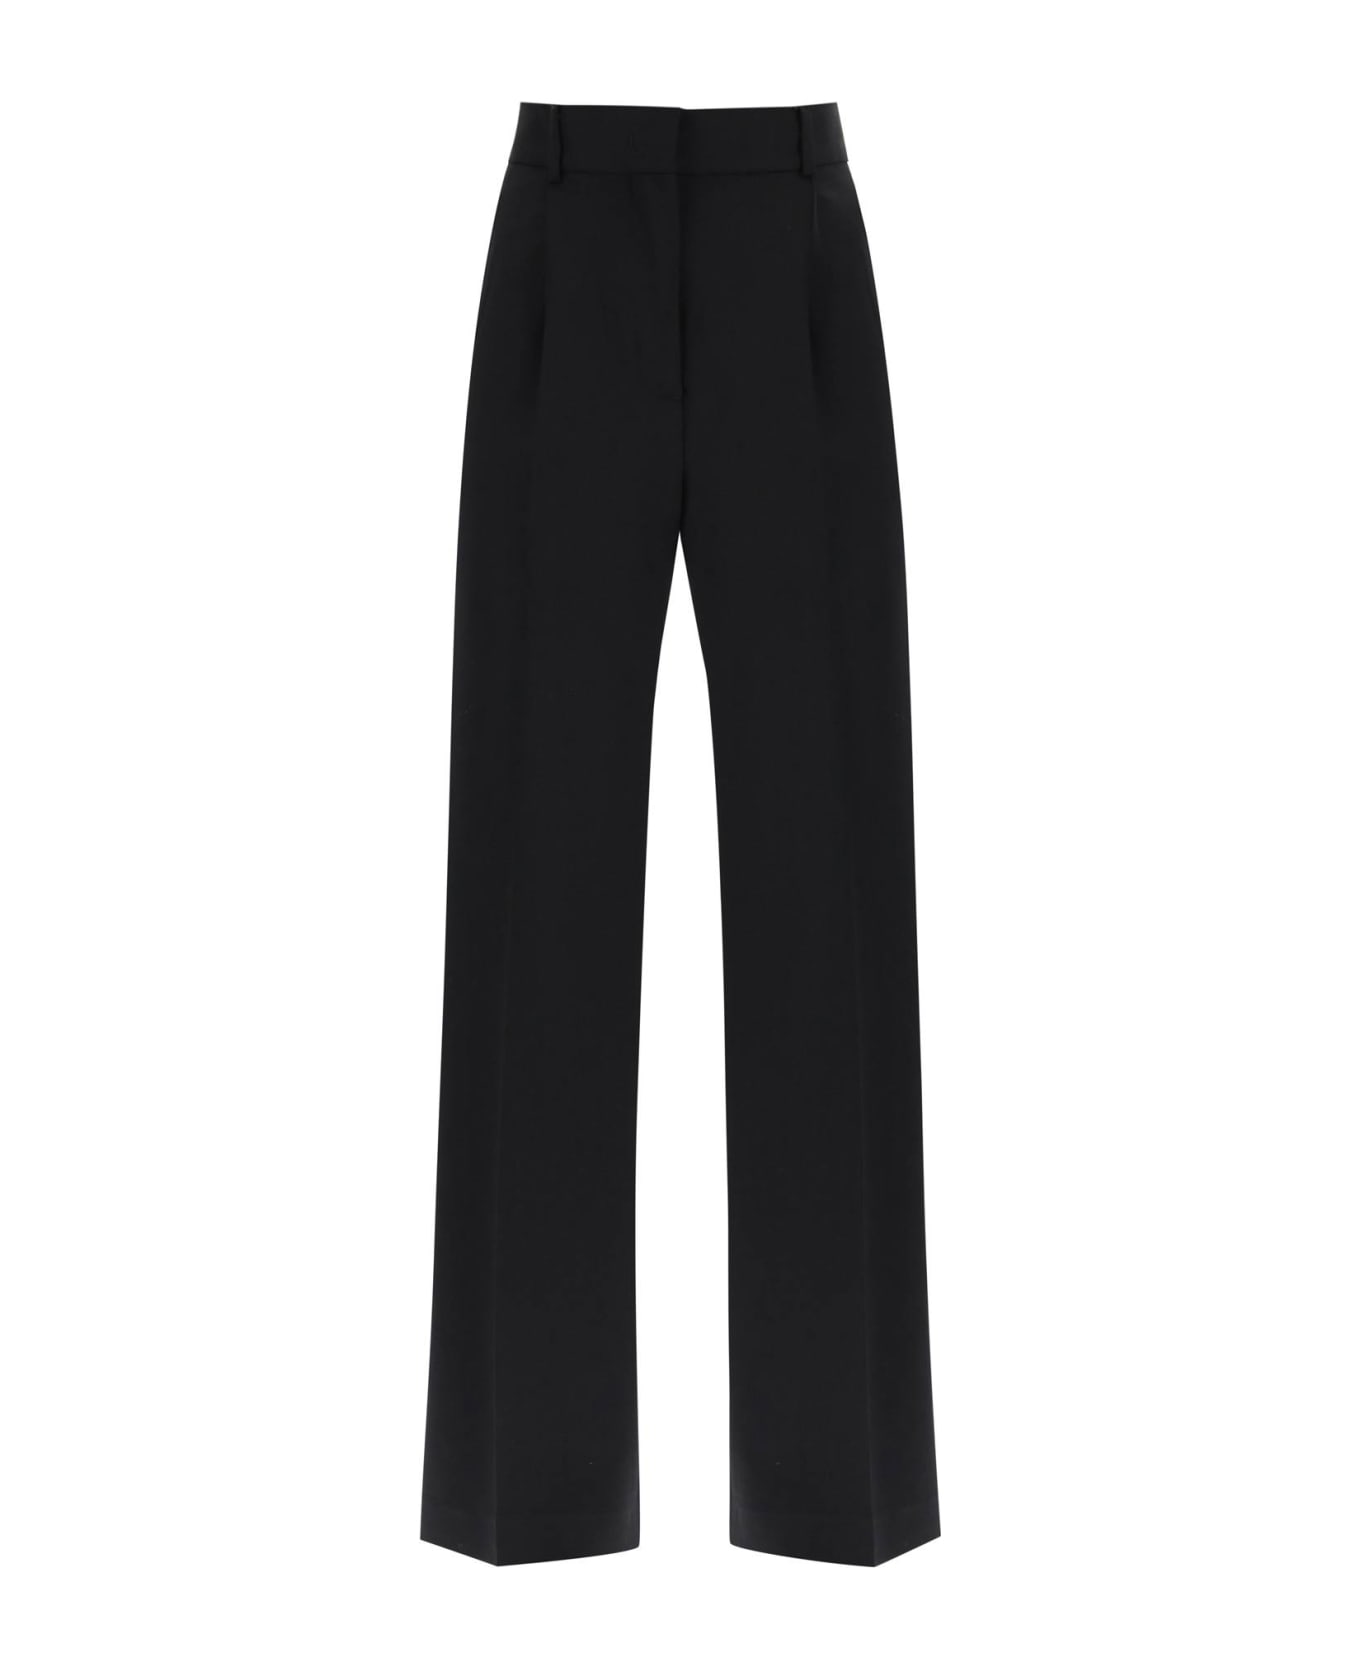 MSGM Tailoring Pants With Wide Leg - NERO (Black) ボトムス